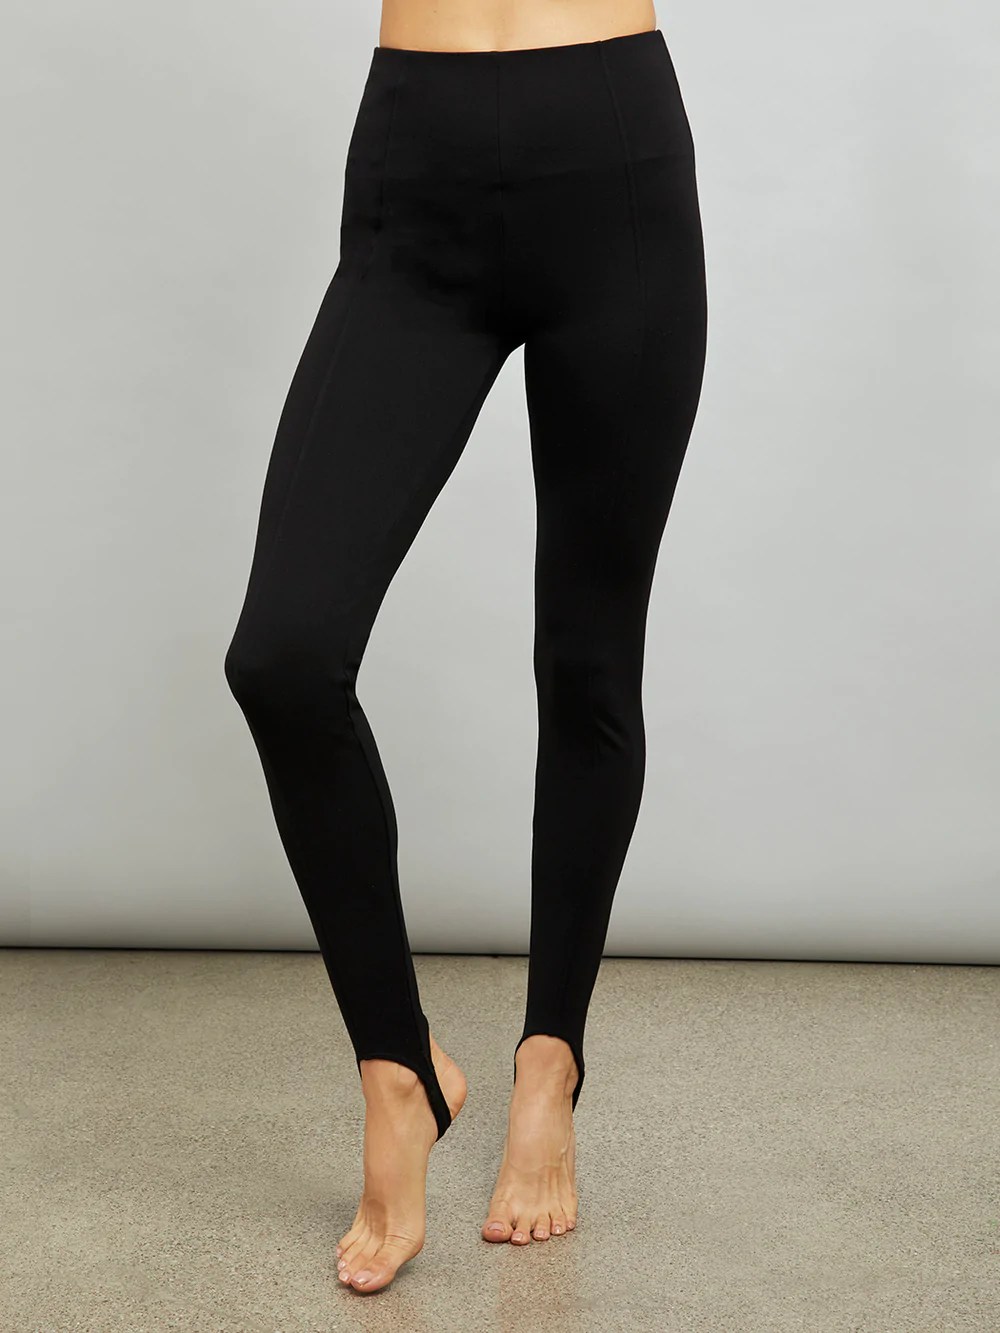 Stirrup Tights - A Classic Opaque Accessory Now with Fleece– Fleece Chic